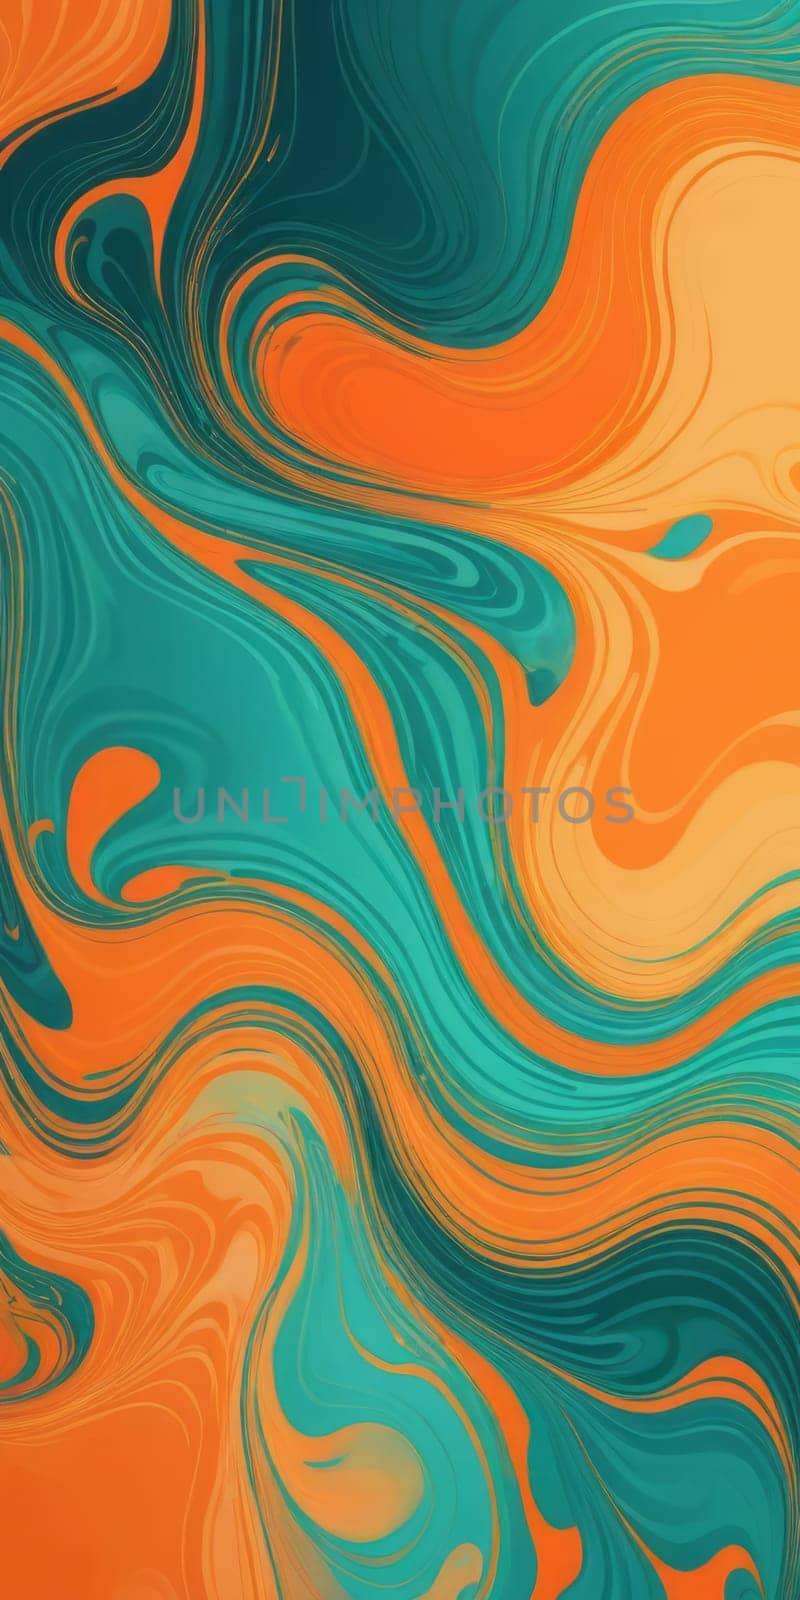 Marbled Shapes in Orange and Green by nkotlyar